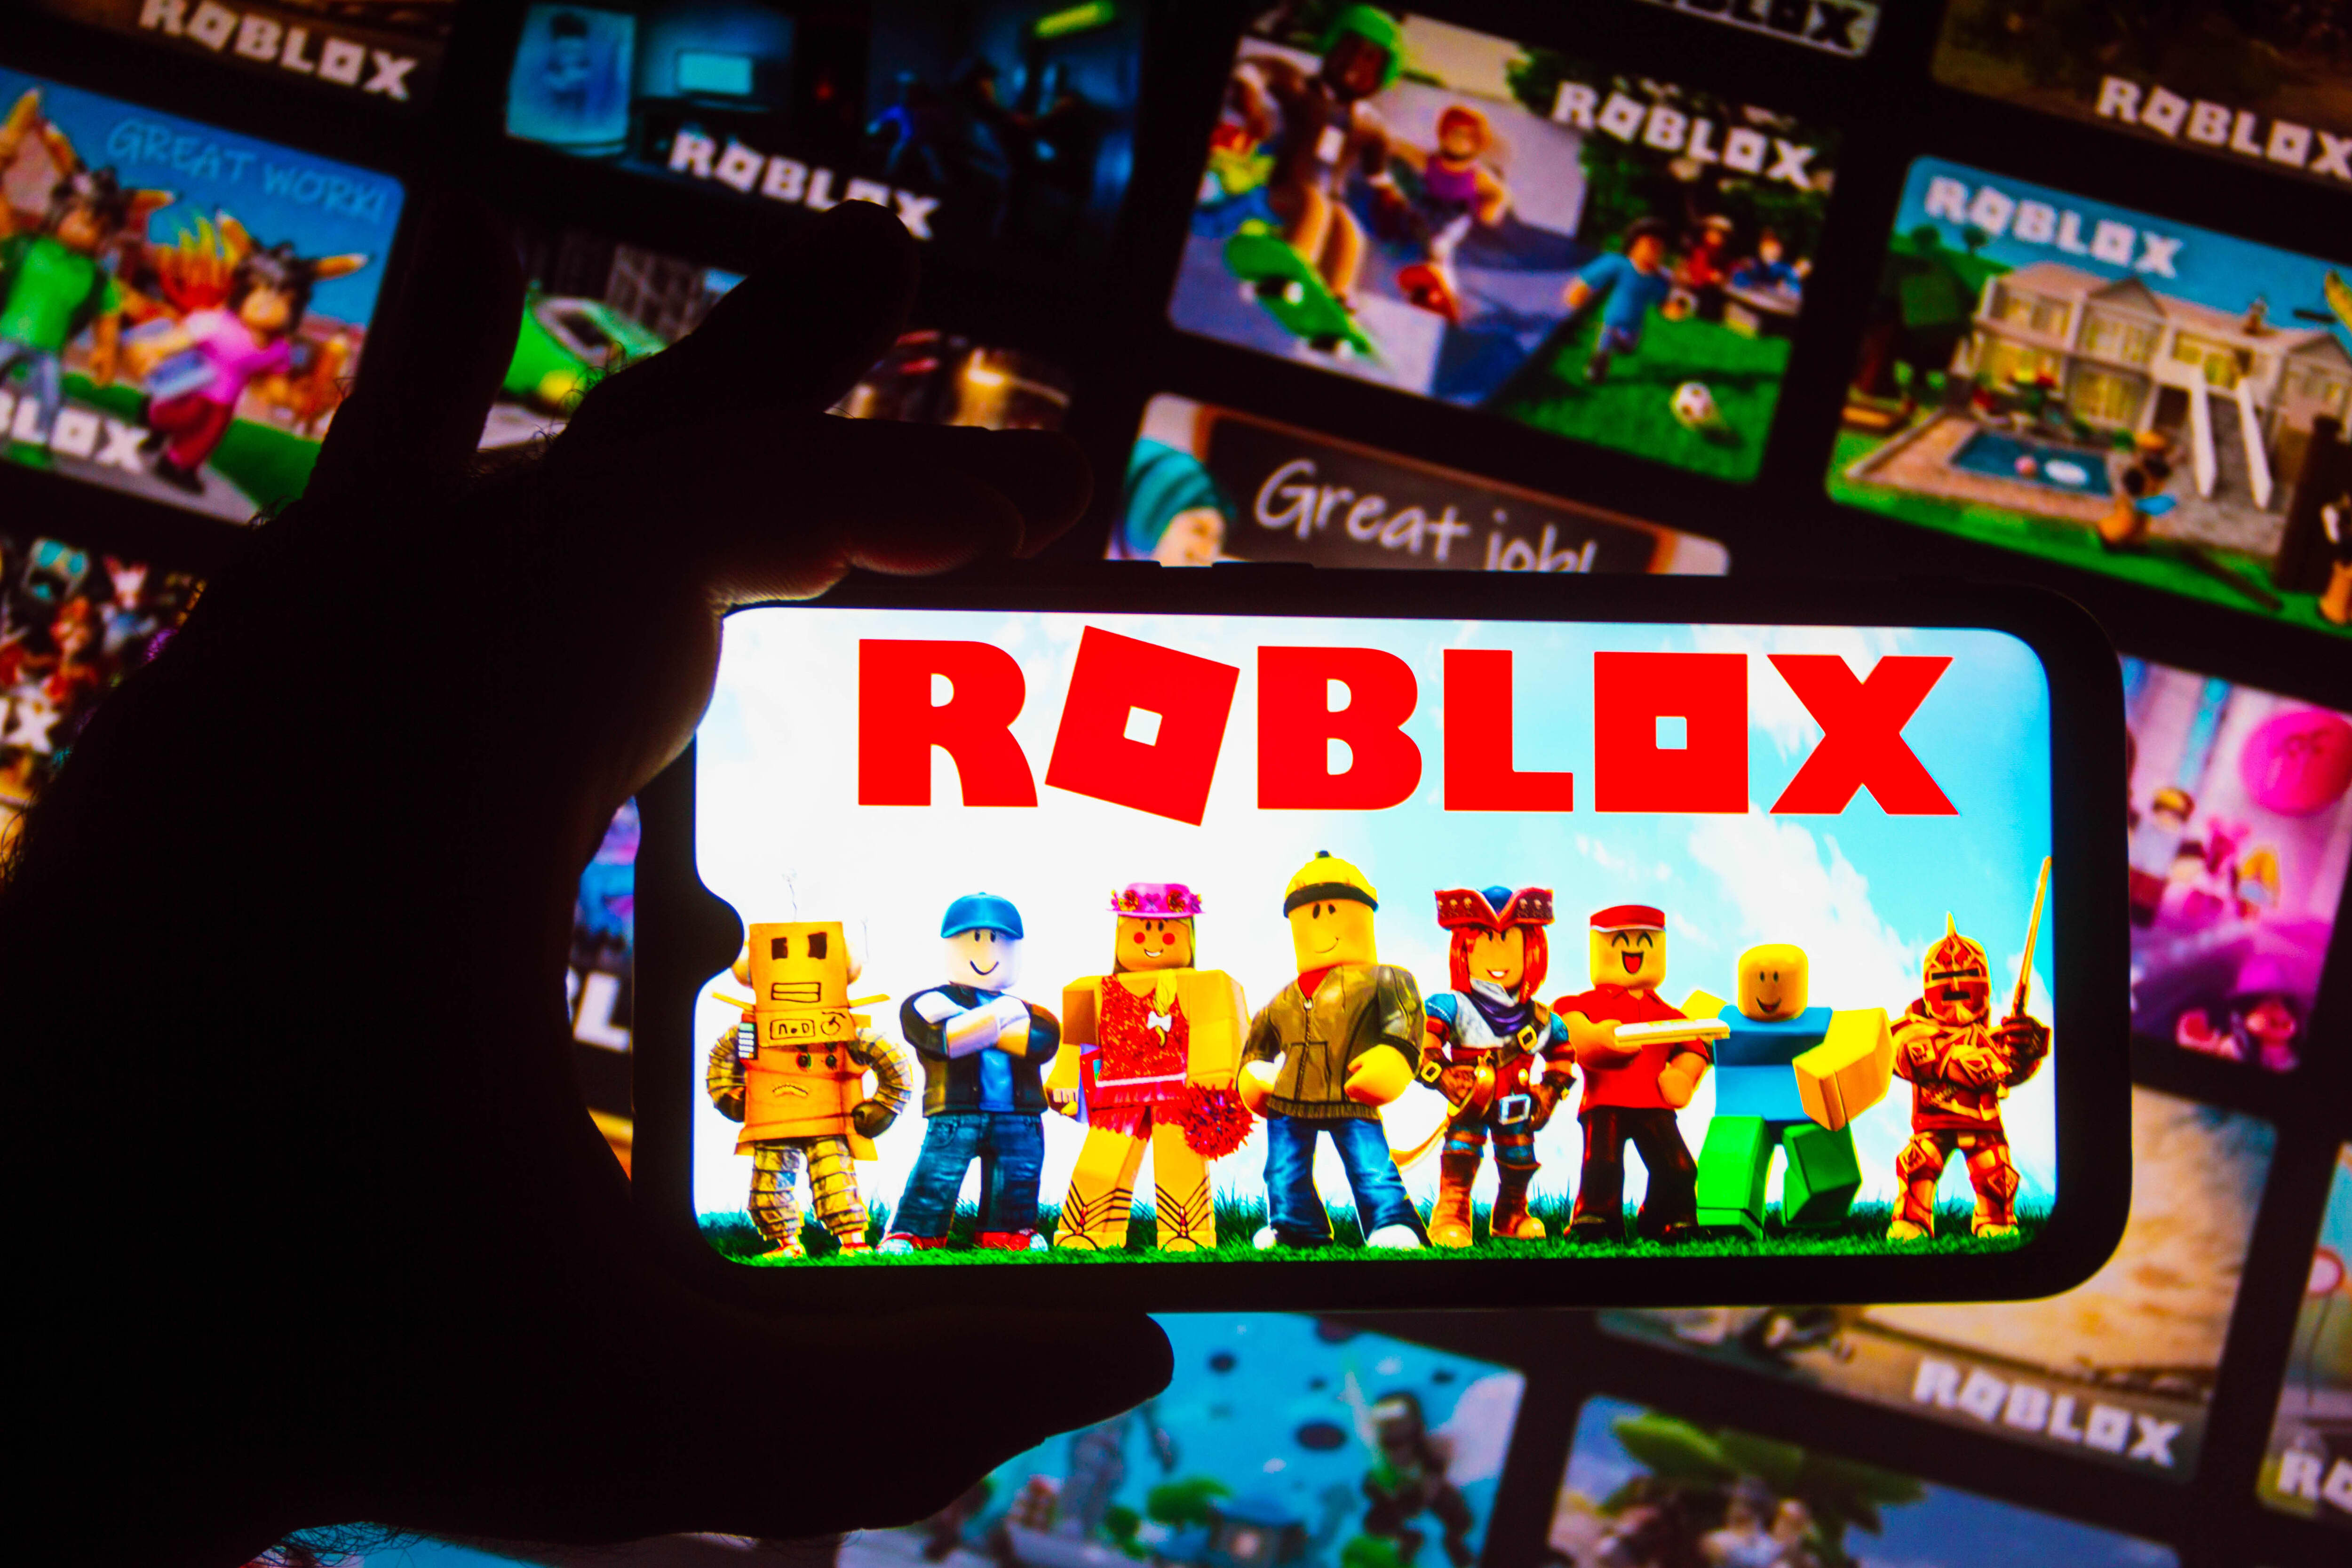 Gaming platform Roblox comes back online after three-day outage – CNBC